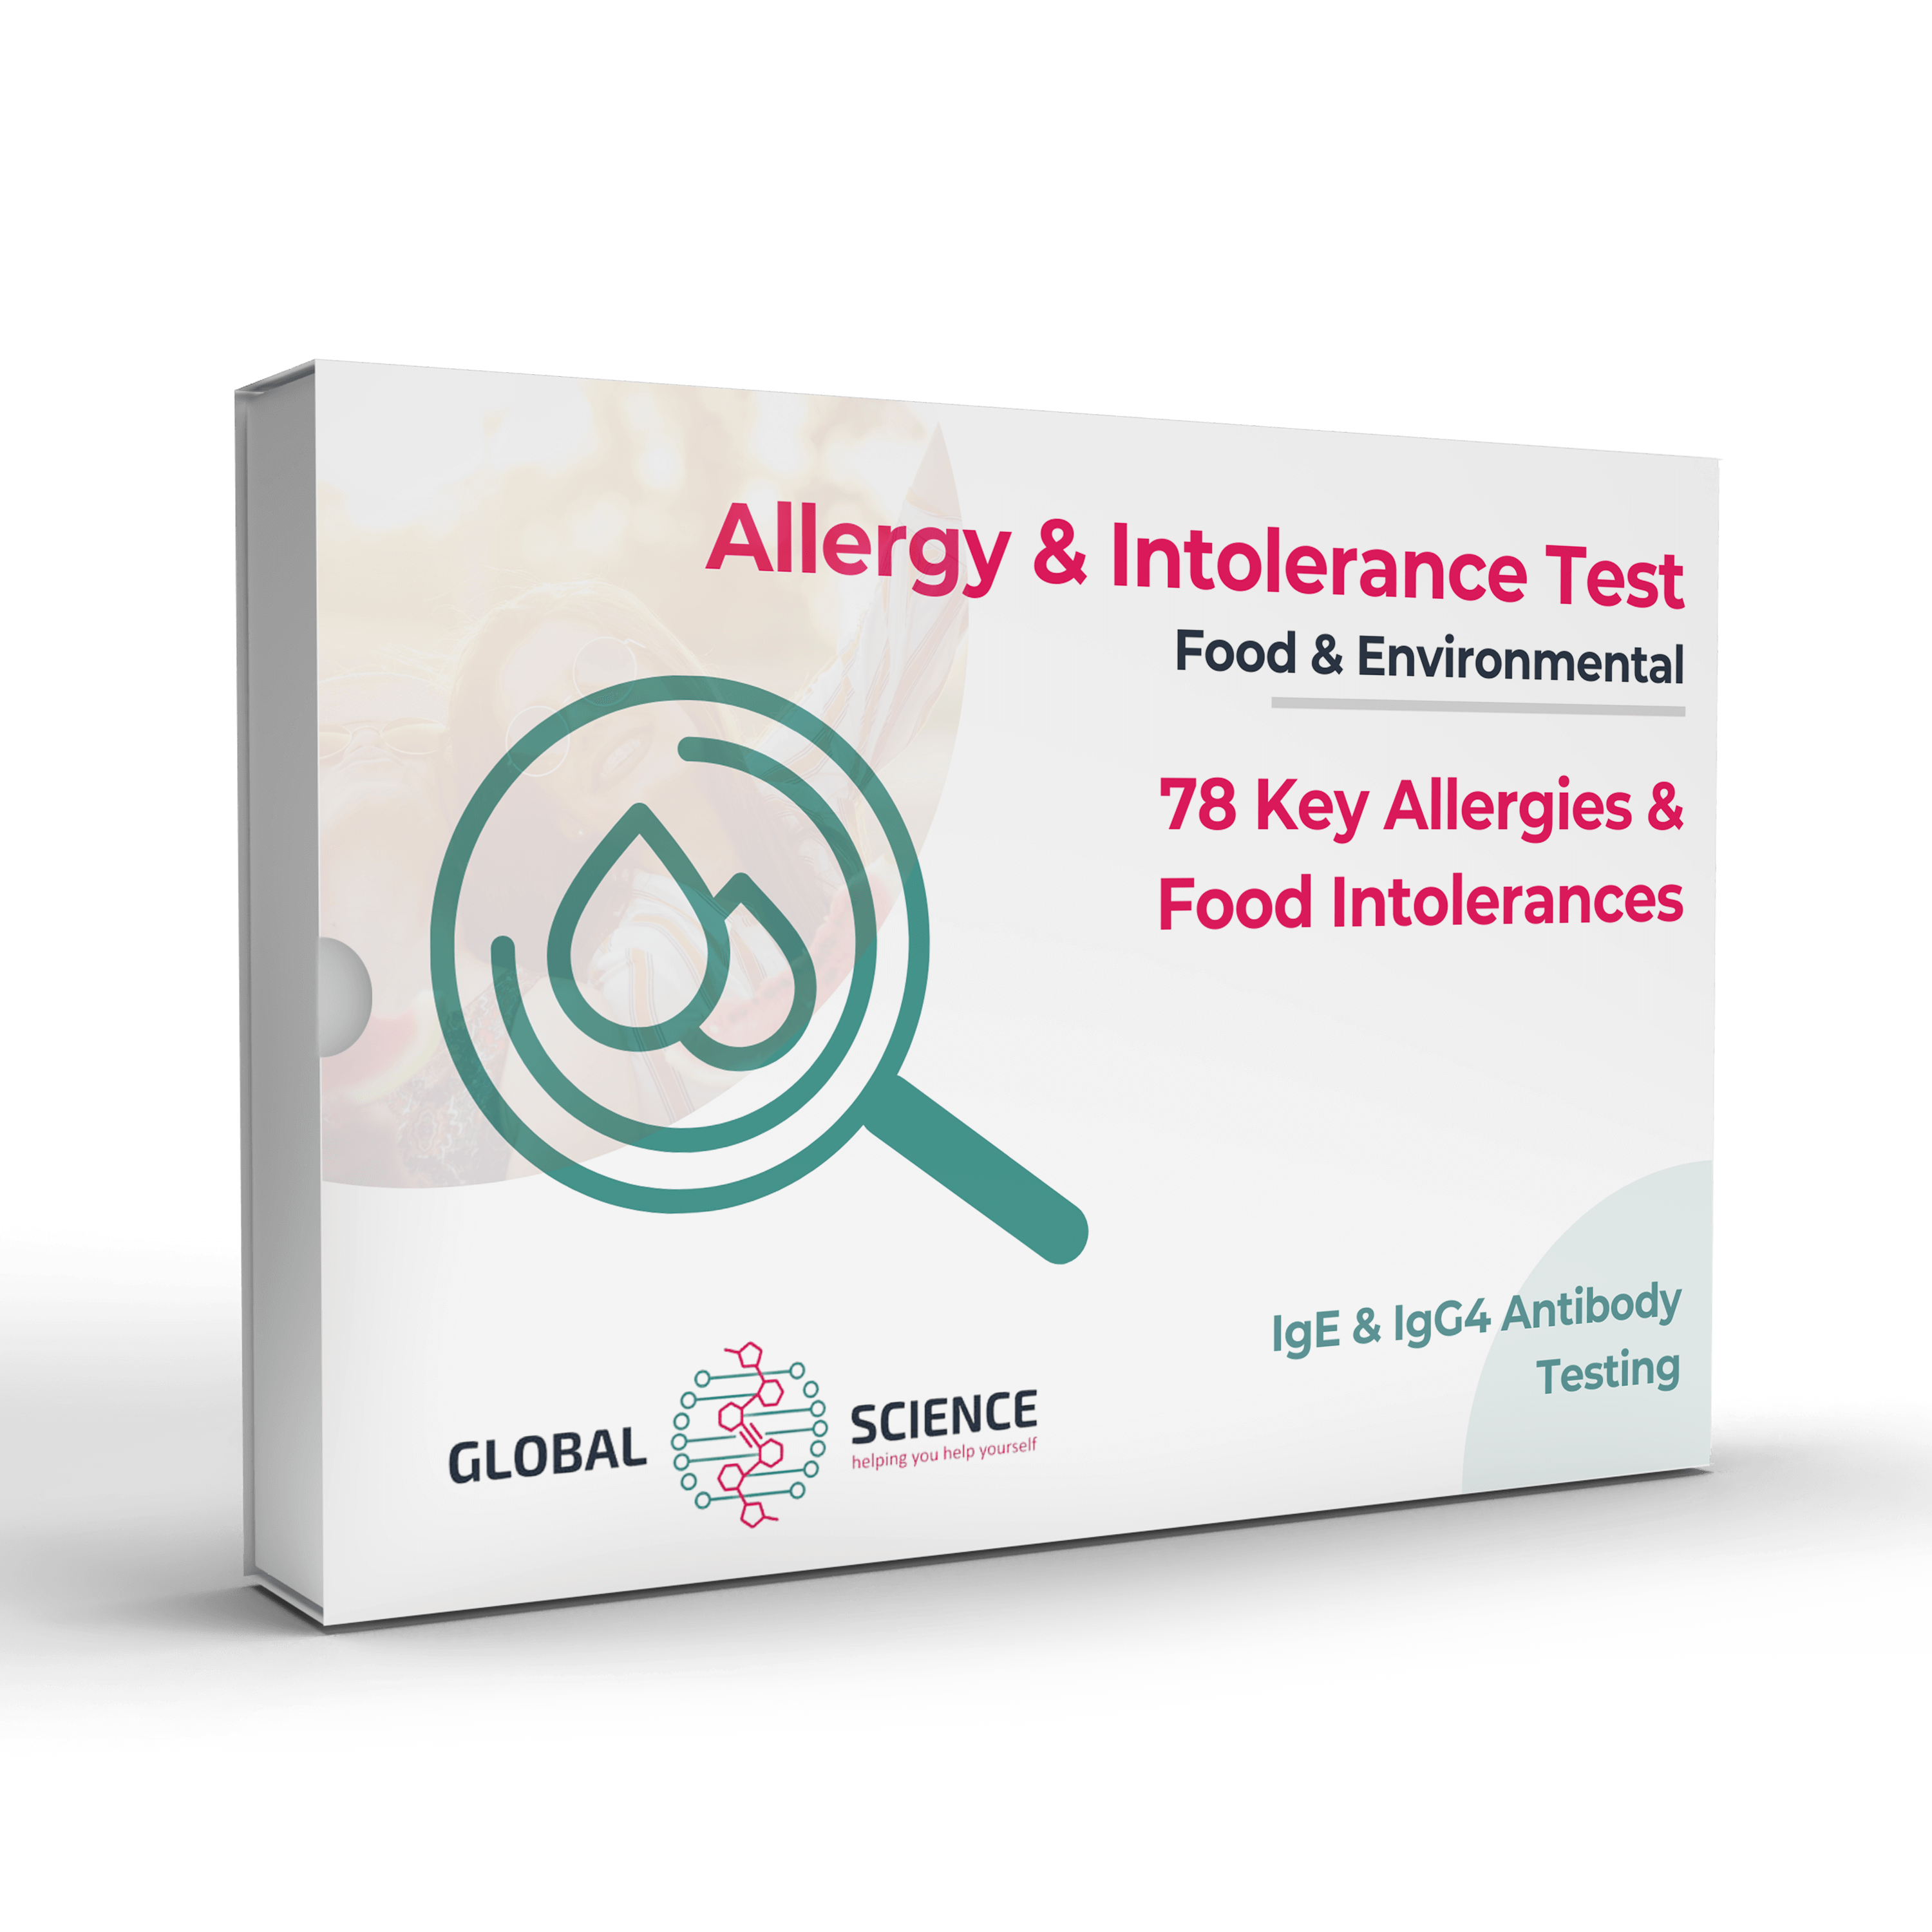 TMI TMA Allergy and Intolerance Test - How allergy testing works